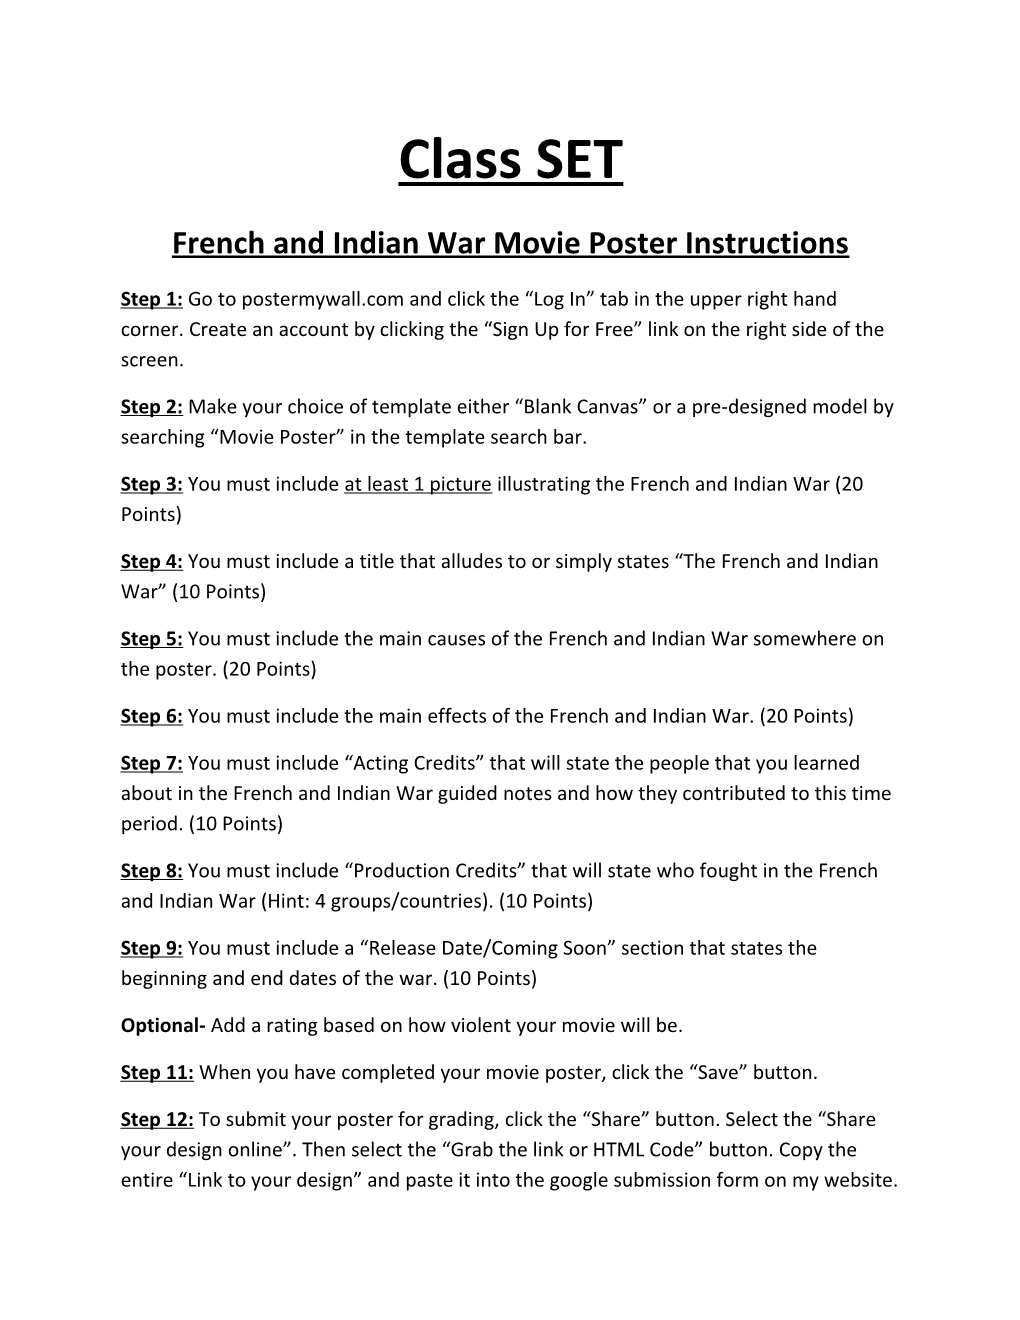 French and Indian War Movie Poster Instructions